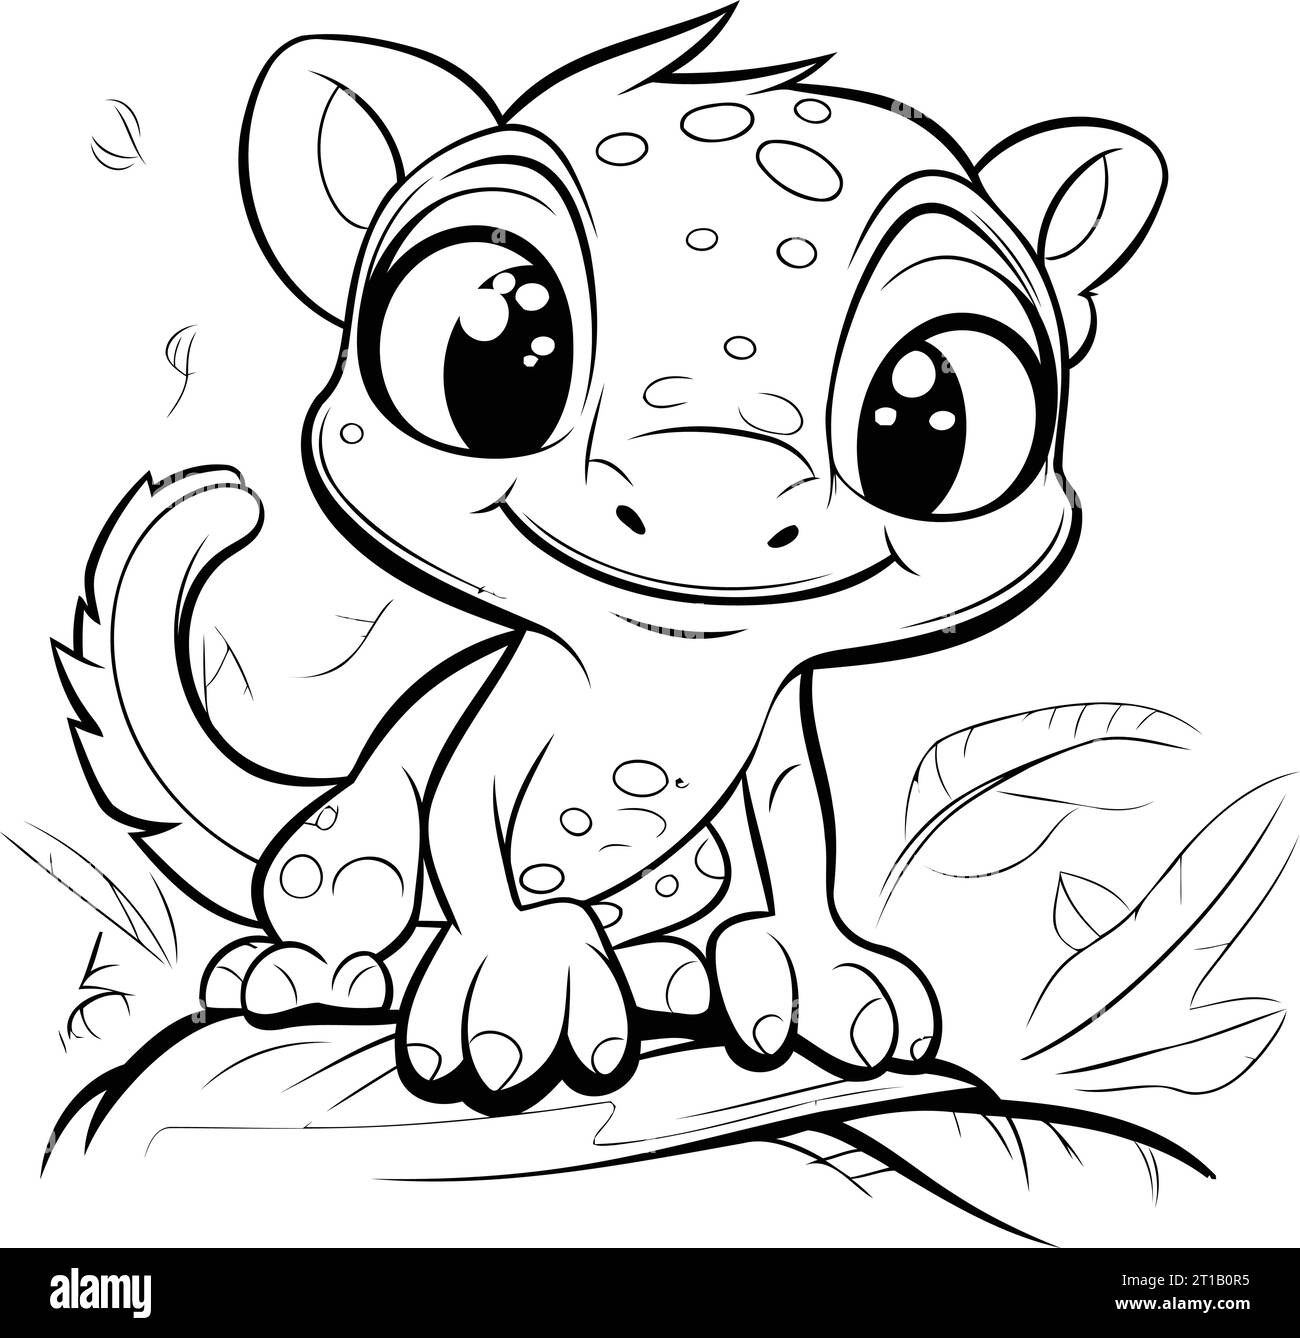 Cute little frog sitting on a branch. Coloring book for children. Stock Vector